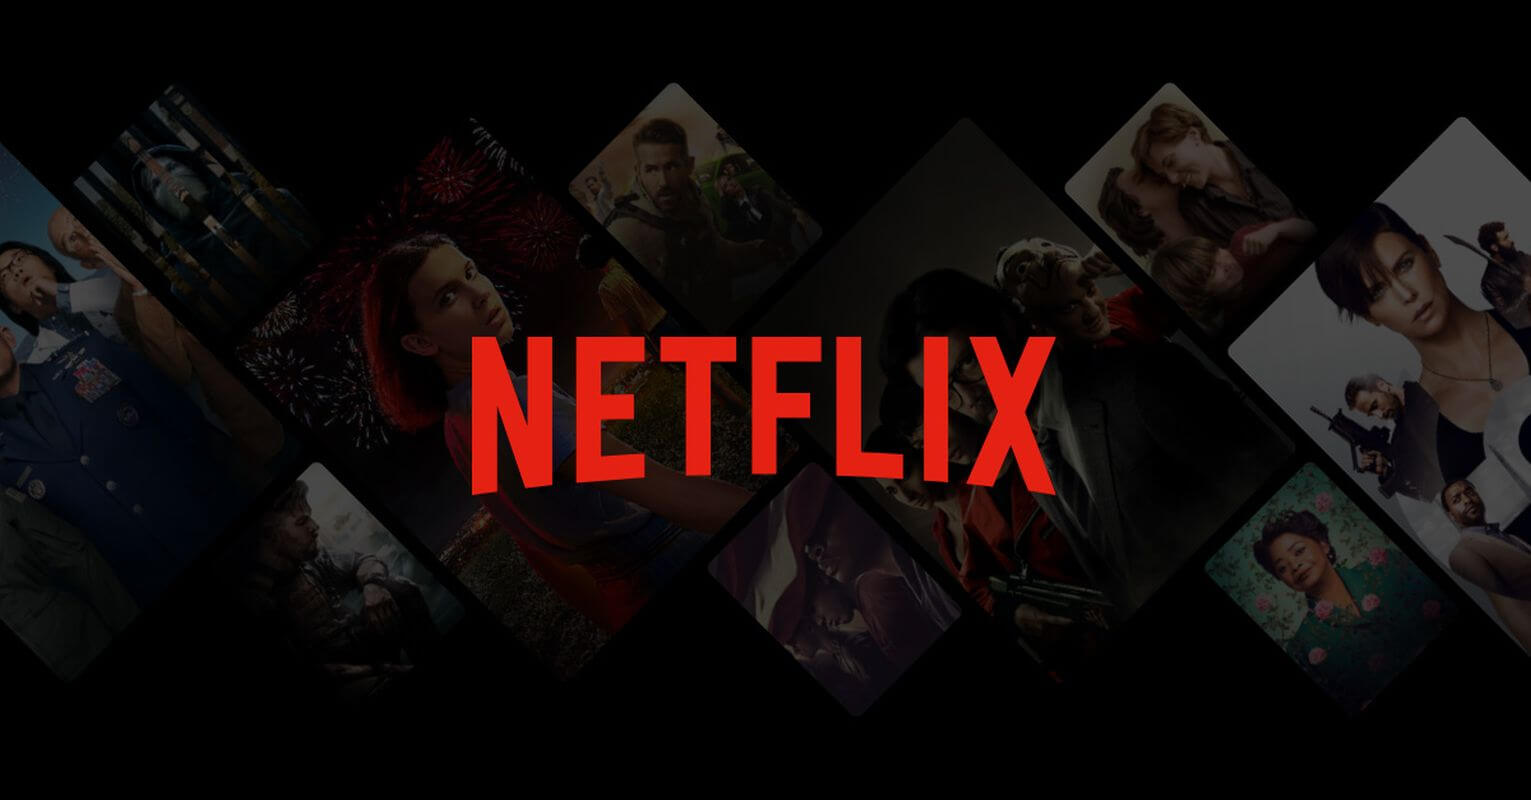 geographic segmentation in marketing: real life example of Netflix